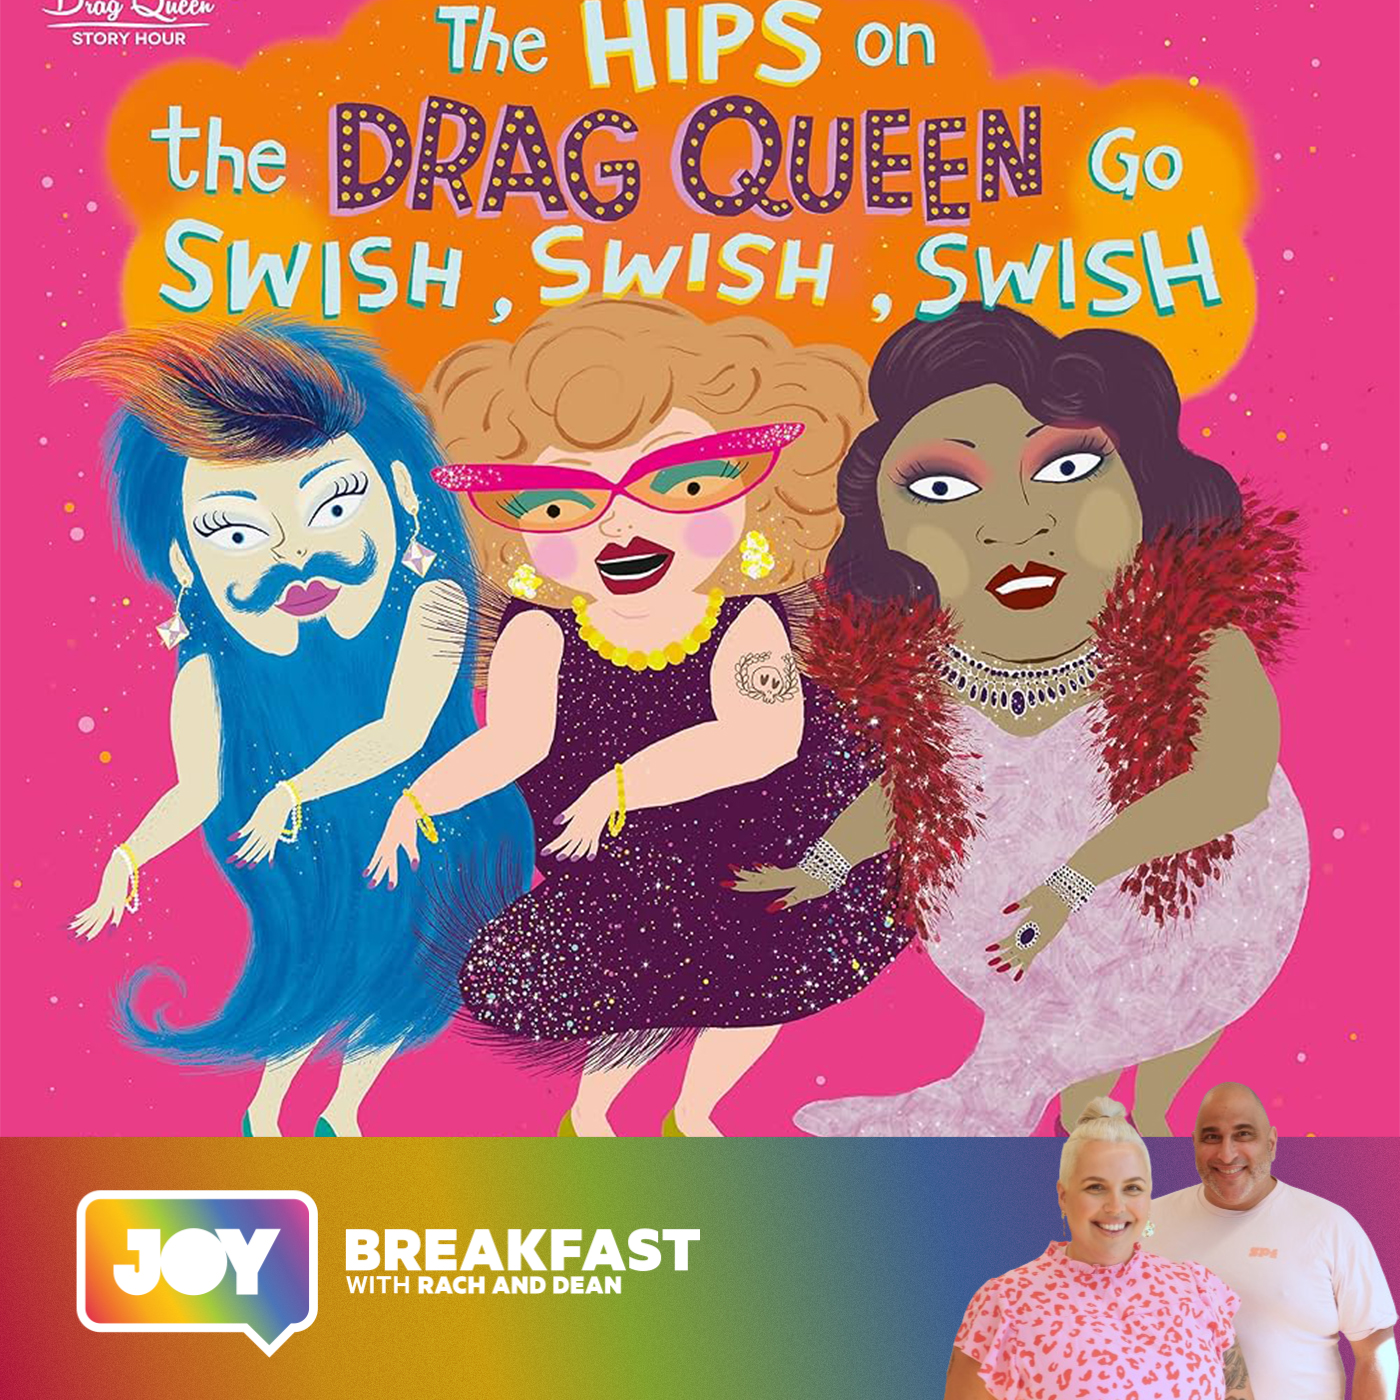 The Hips on the Drag Queen go Swish, Swish, Swish – QUILTBAG Story Time